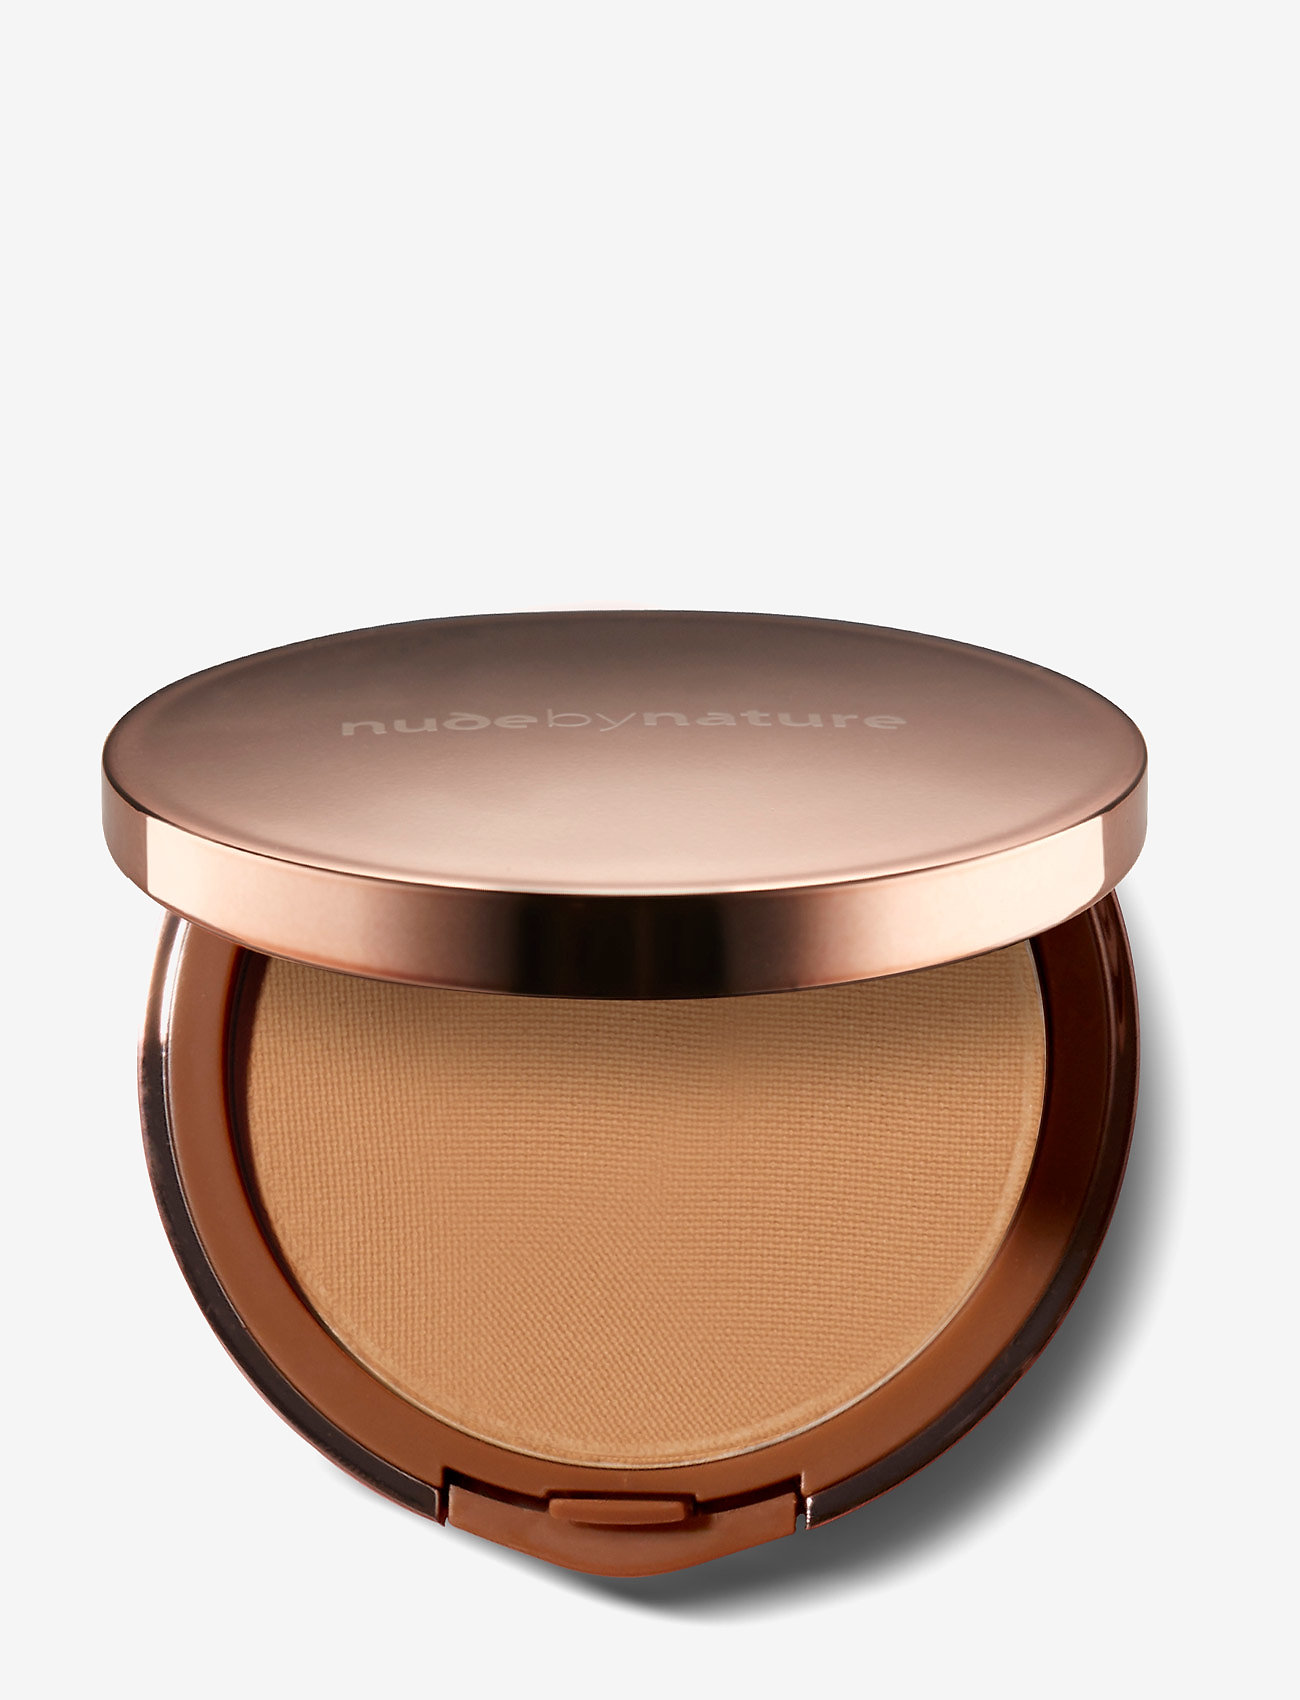 Nude by Nature - FLAWLESS PRESSED POWDER FOUNDATION - party wear at outlet prices - w5 vanilla - 0